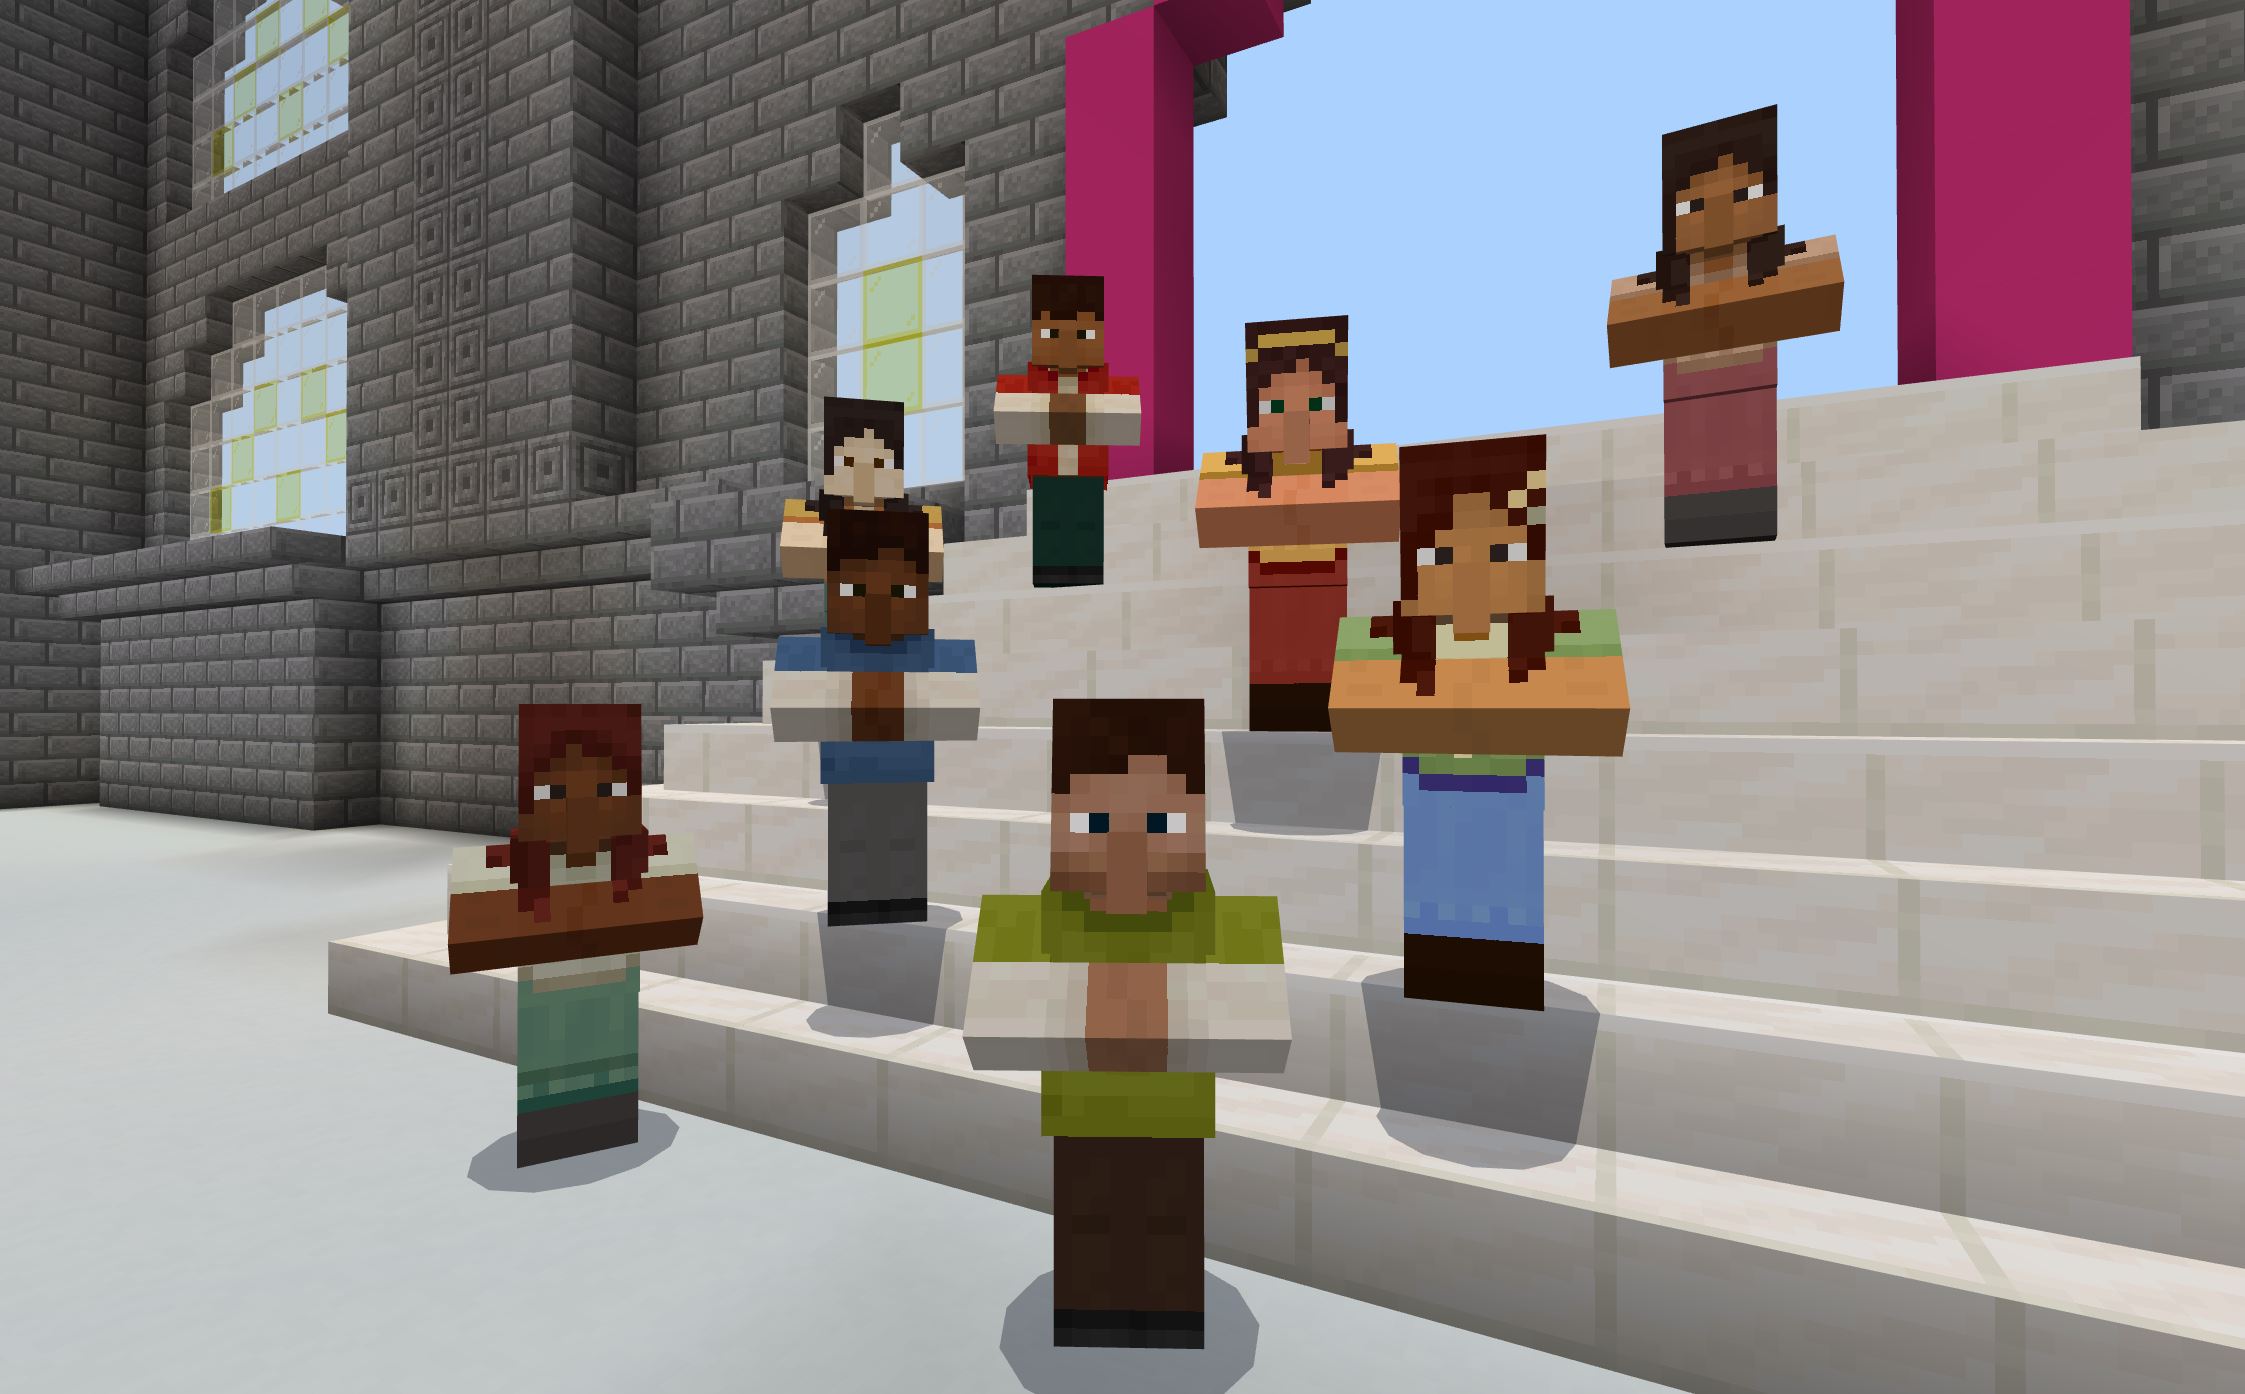 With lessons rooted in social justice movements, Minecraft's Good Trouble  aims to help build a better world - Source